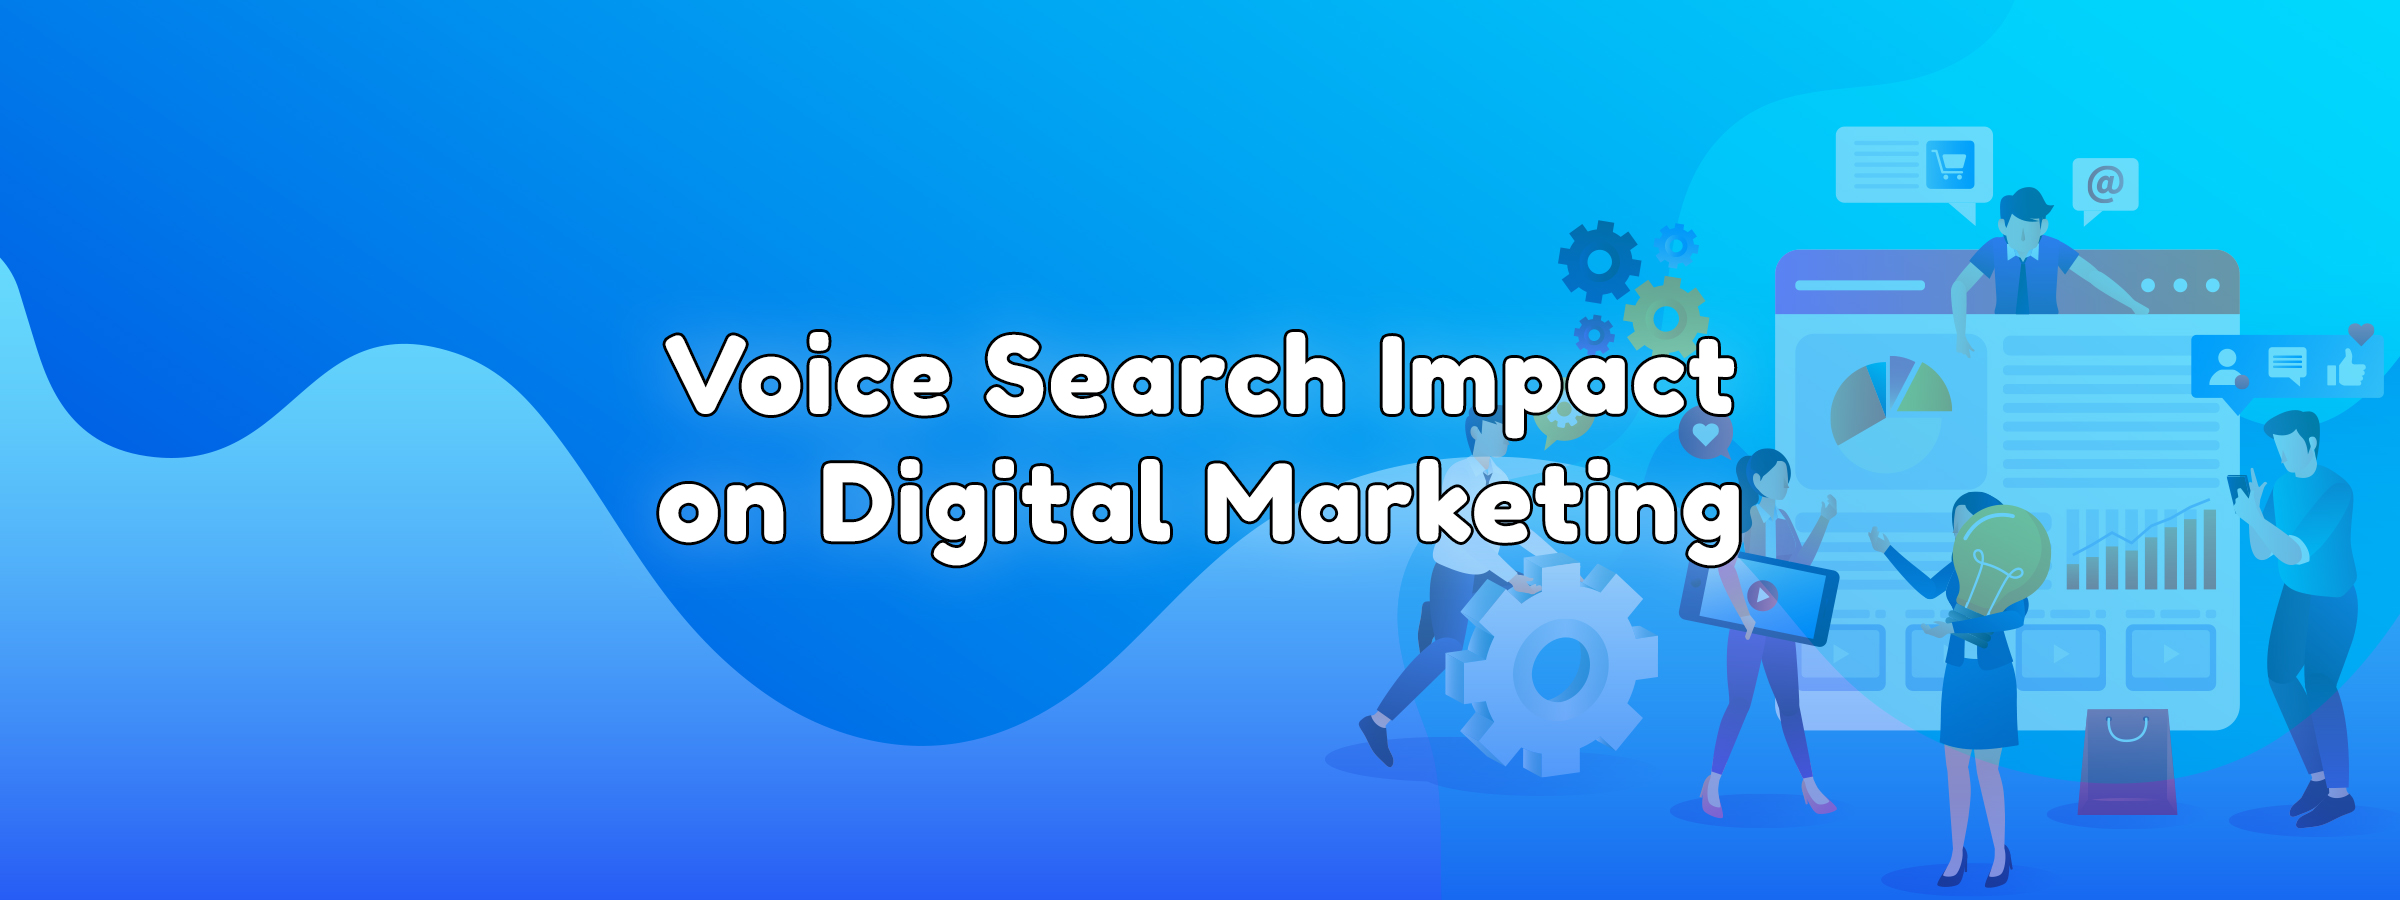 Voice Search Impact on Digital Marketing